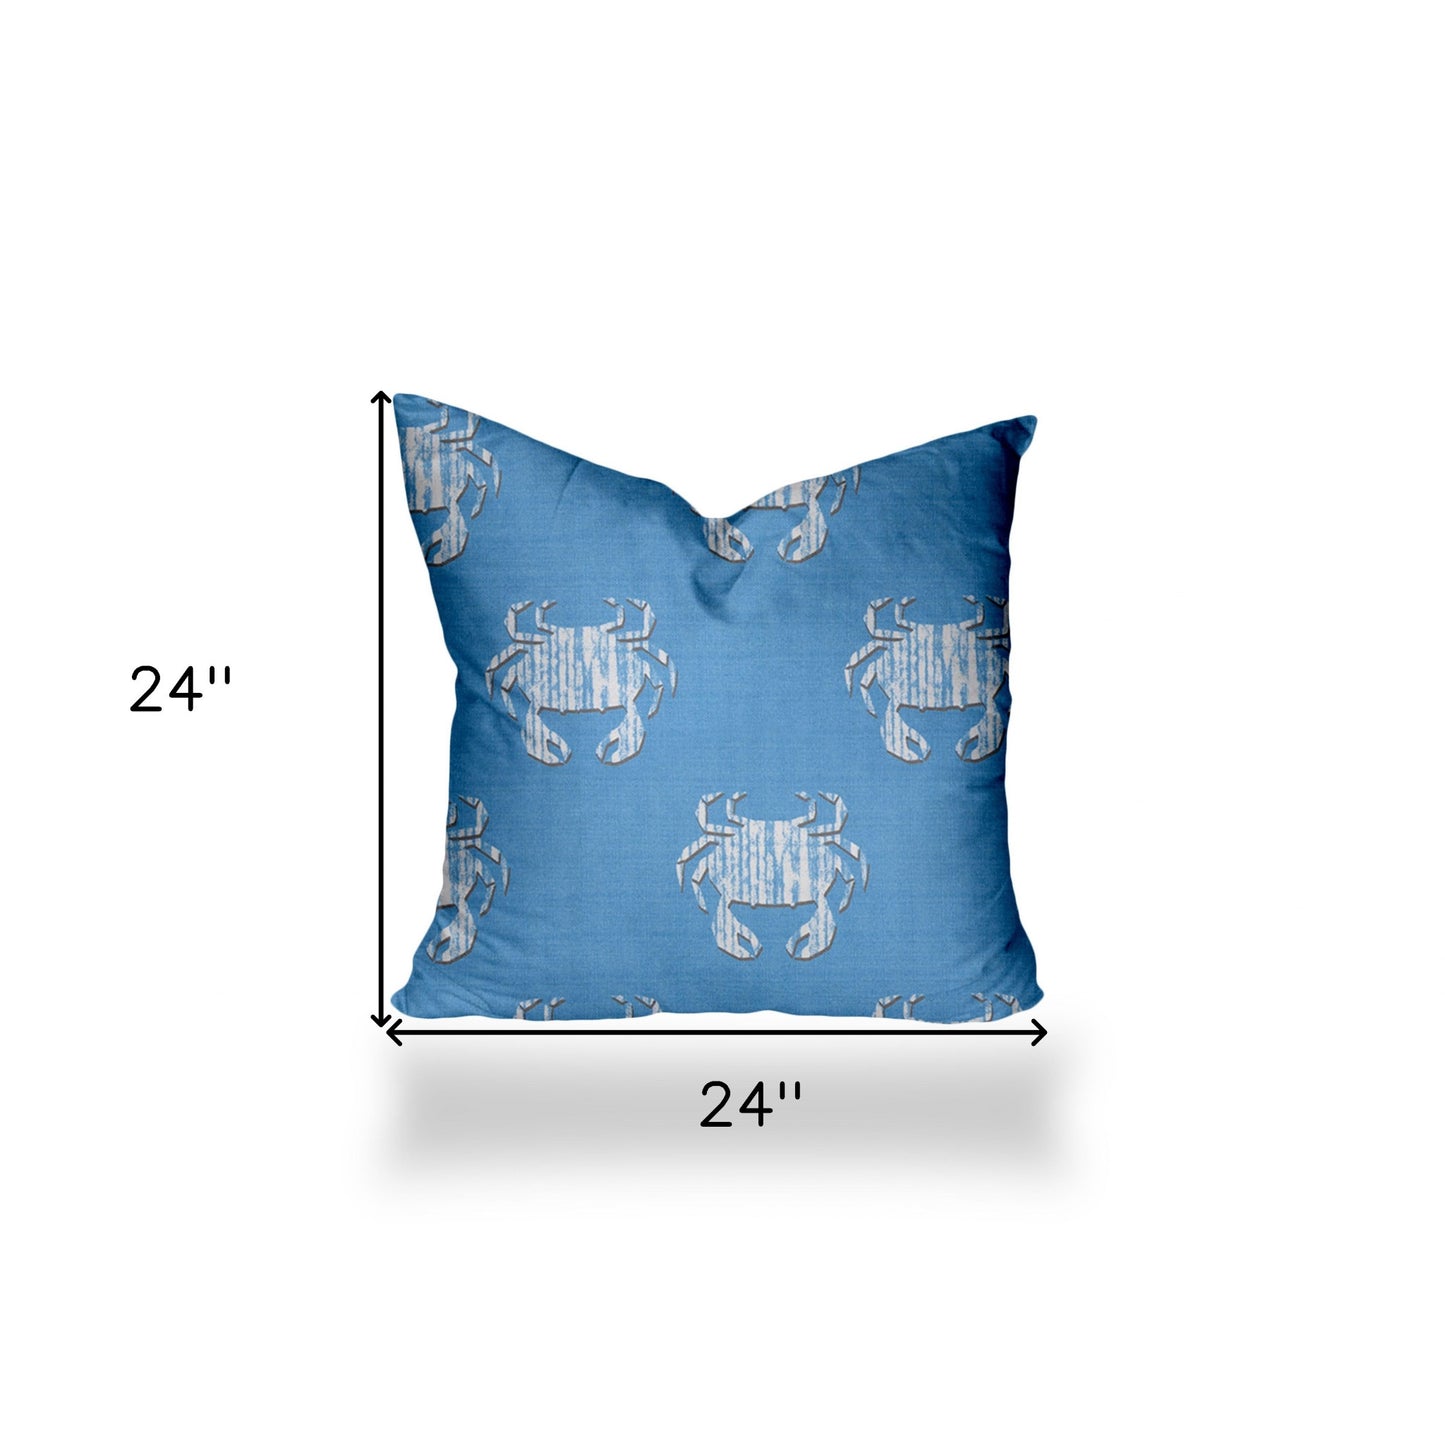 24" X 24" Blue And White Crab Enveloped Coastal Throw Indoor Outdoor Pillow Cover